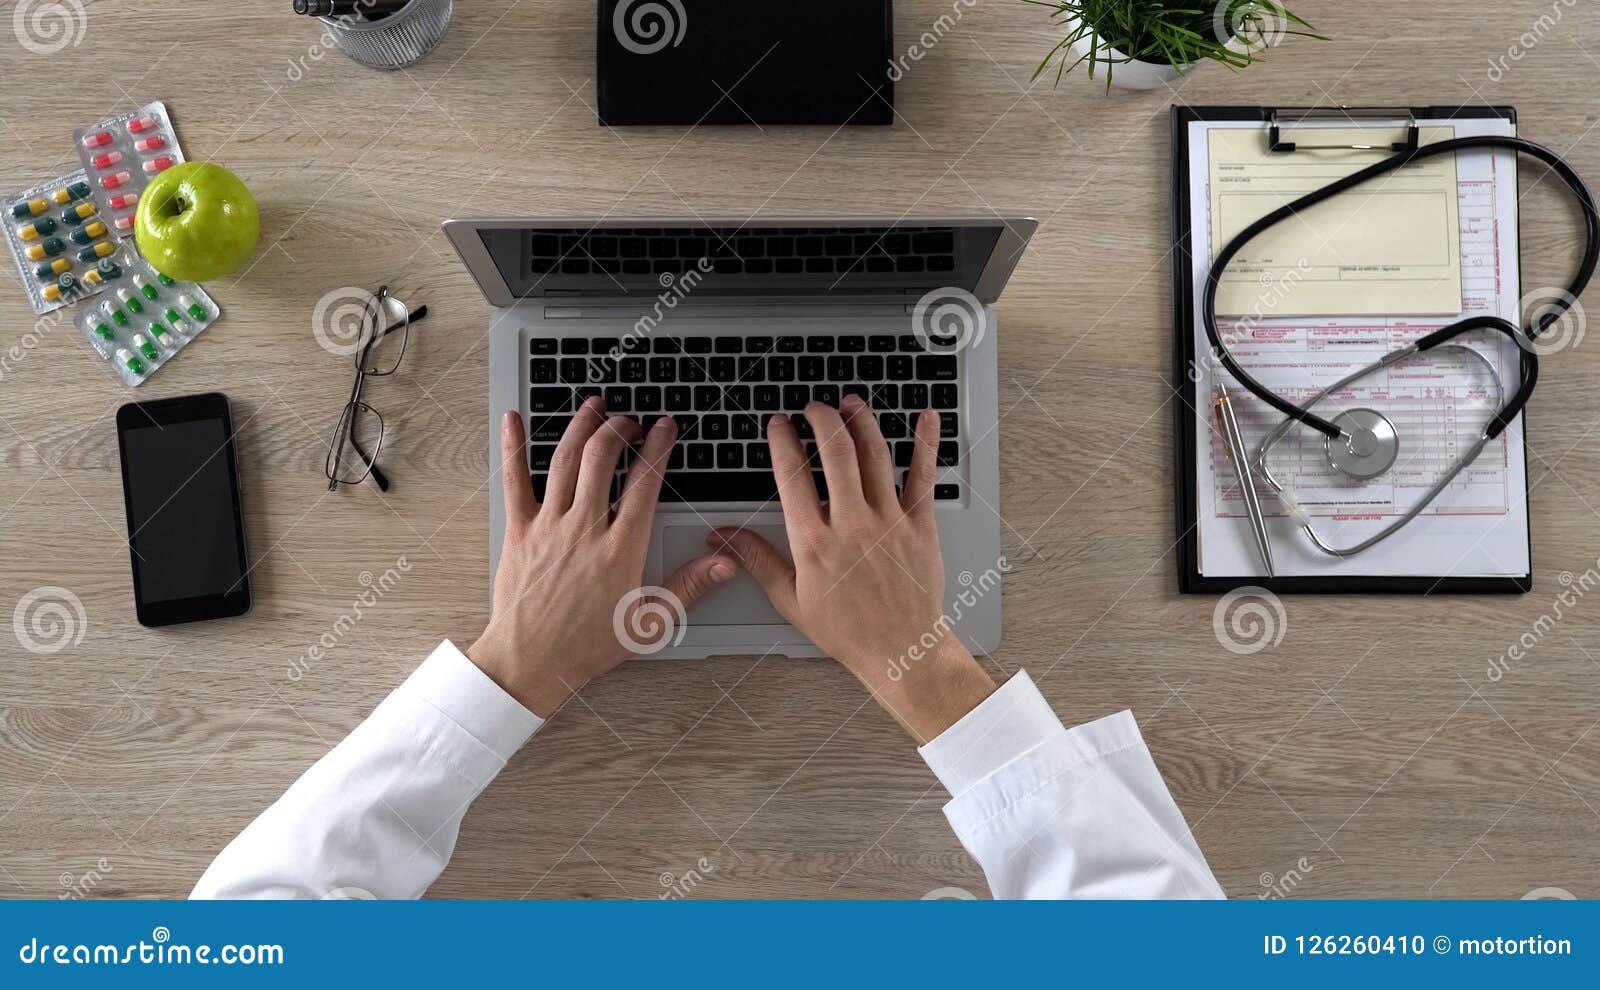 medical worker typing on laptop, keeping electronic medical records, top view